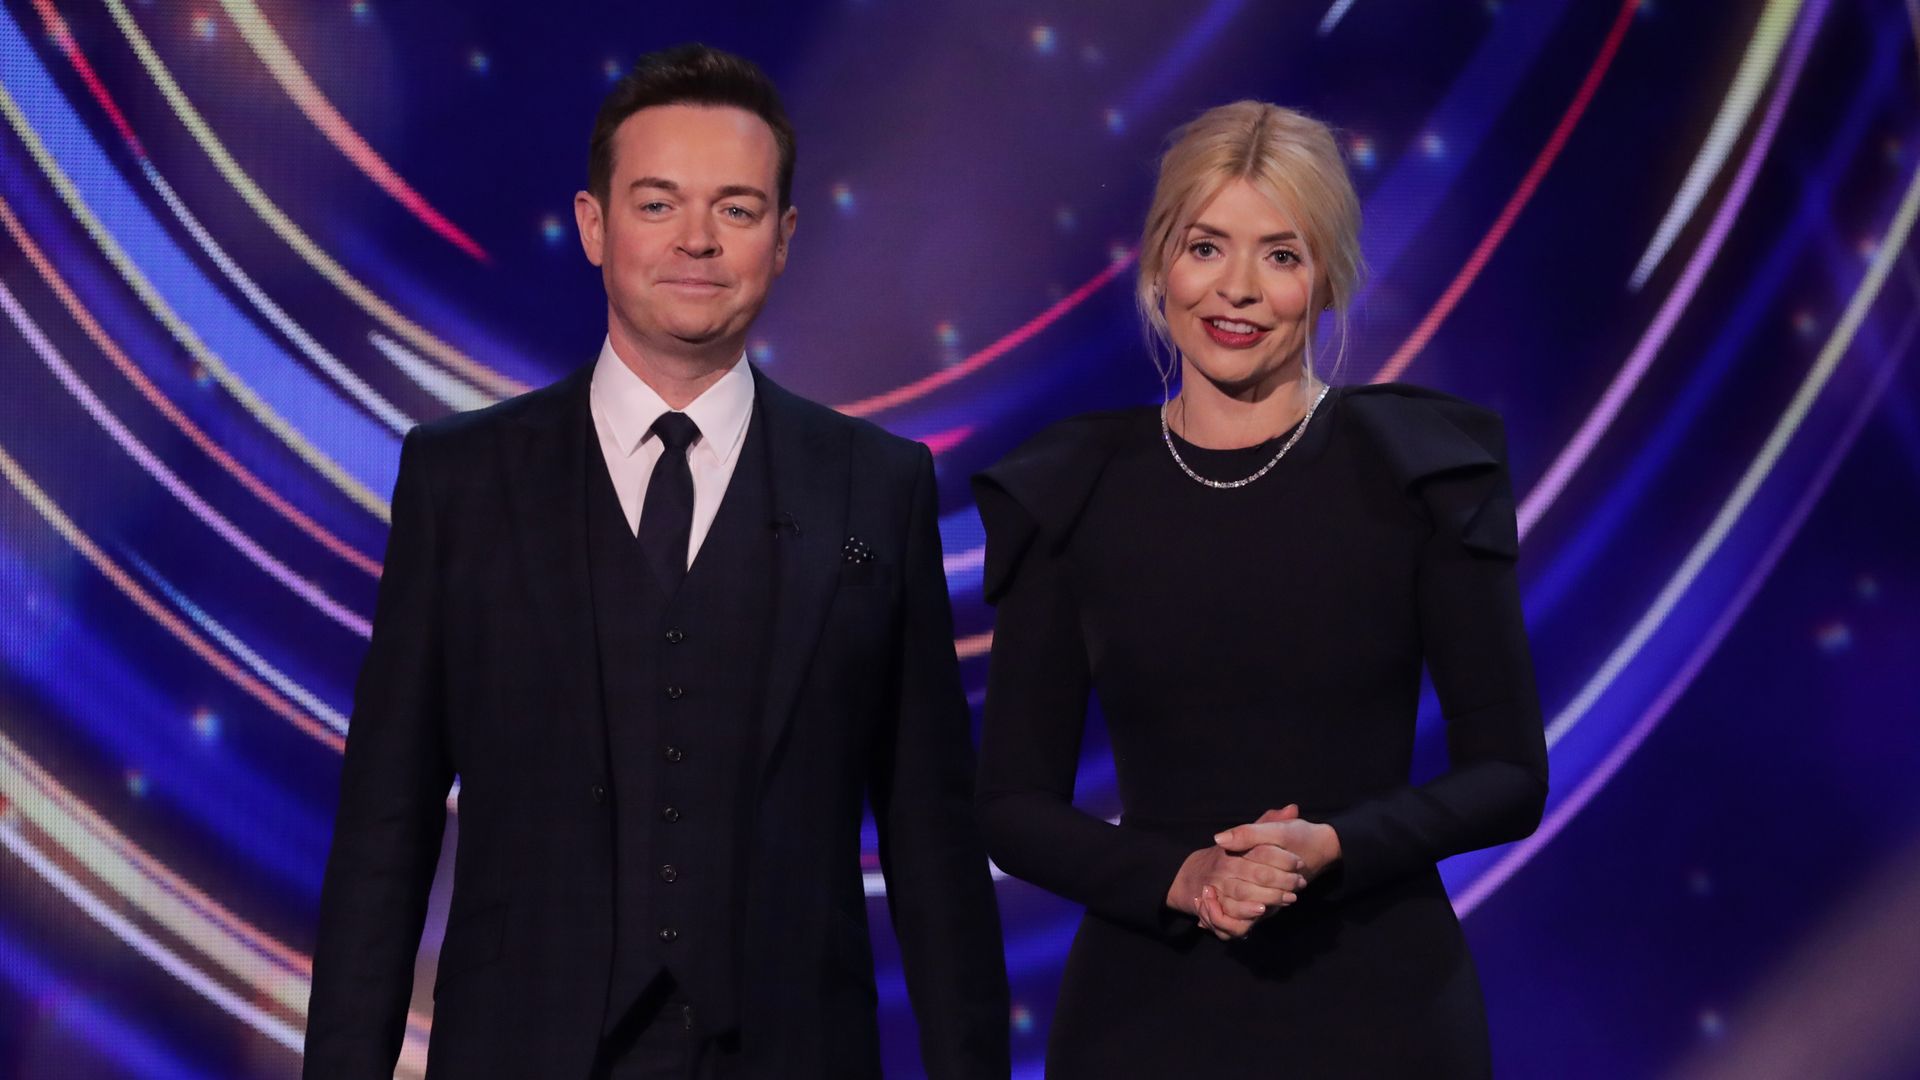 Holly will be joined by Stephen Mulhern